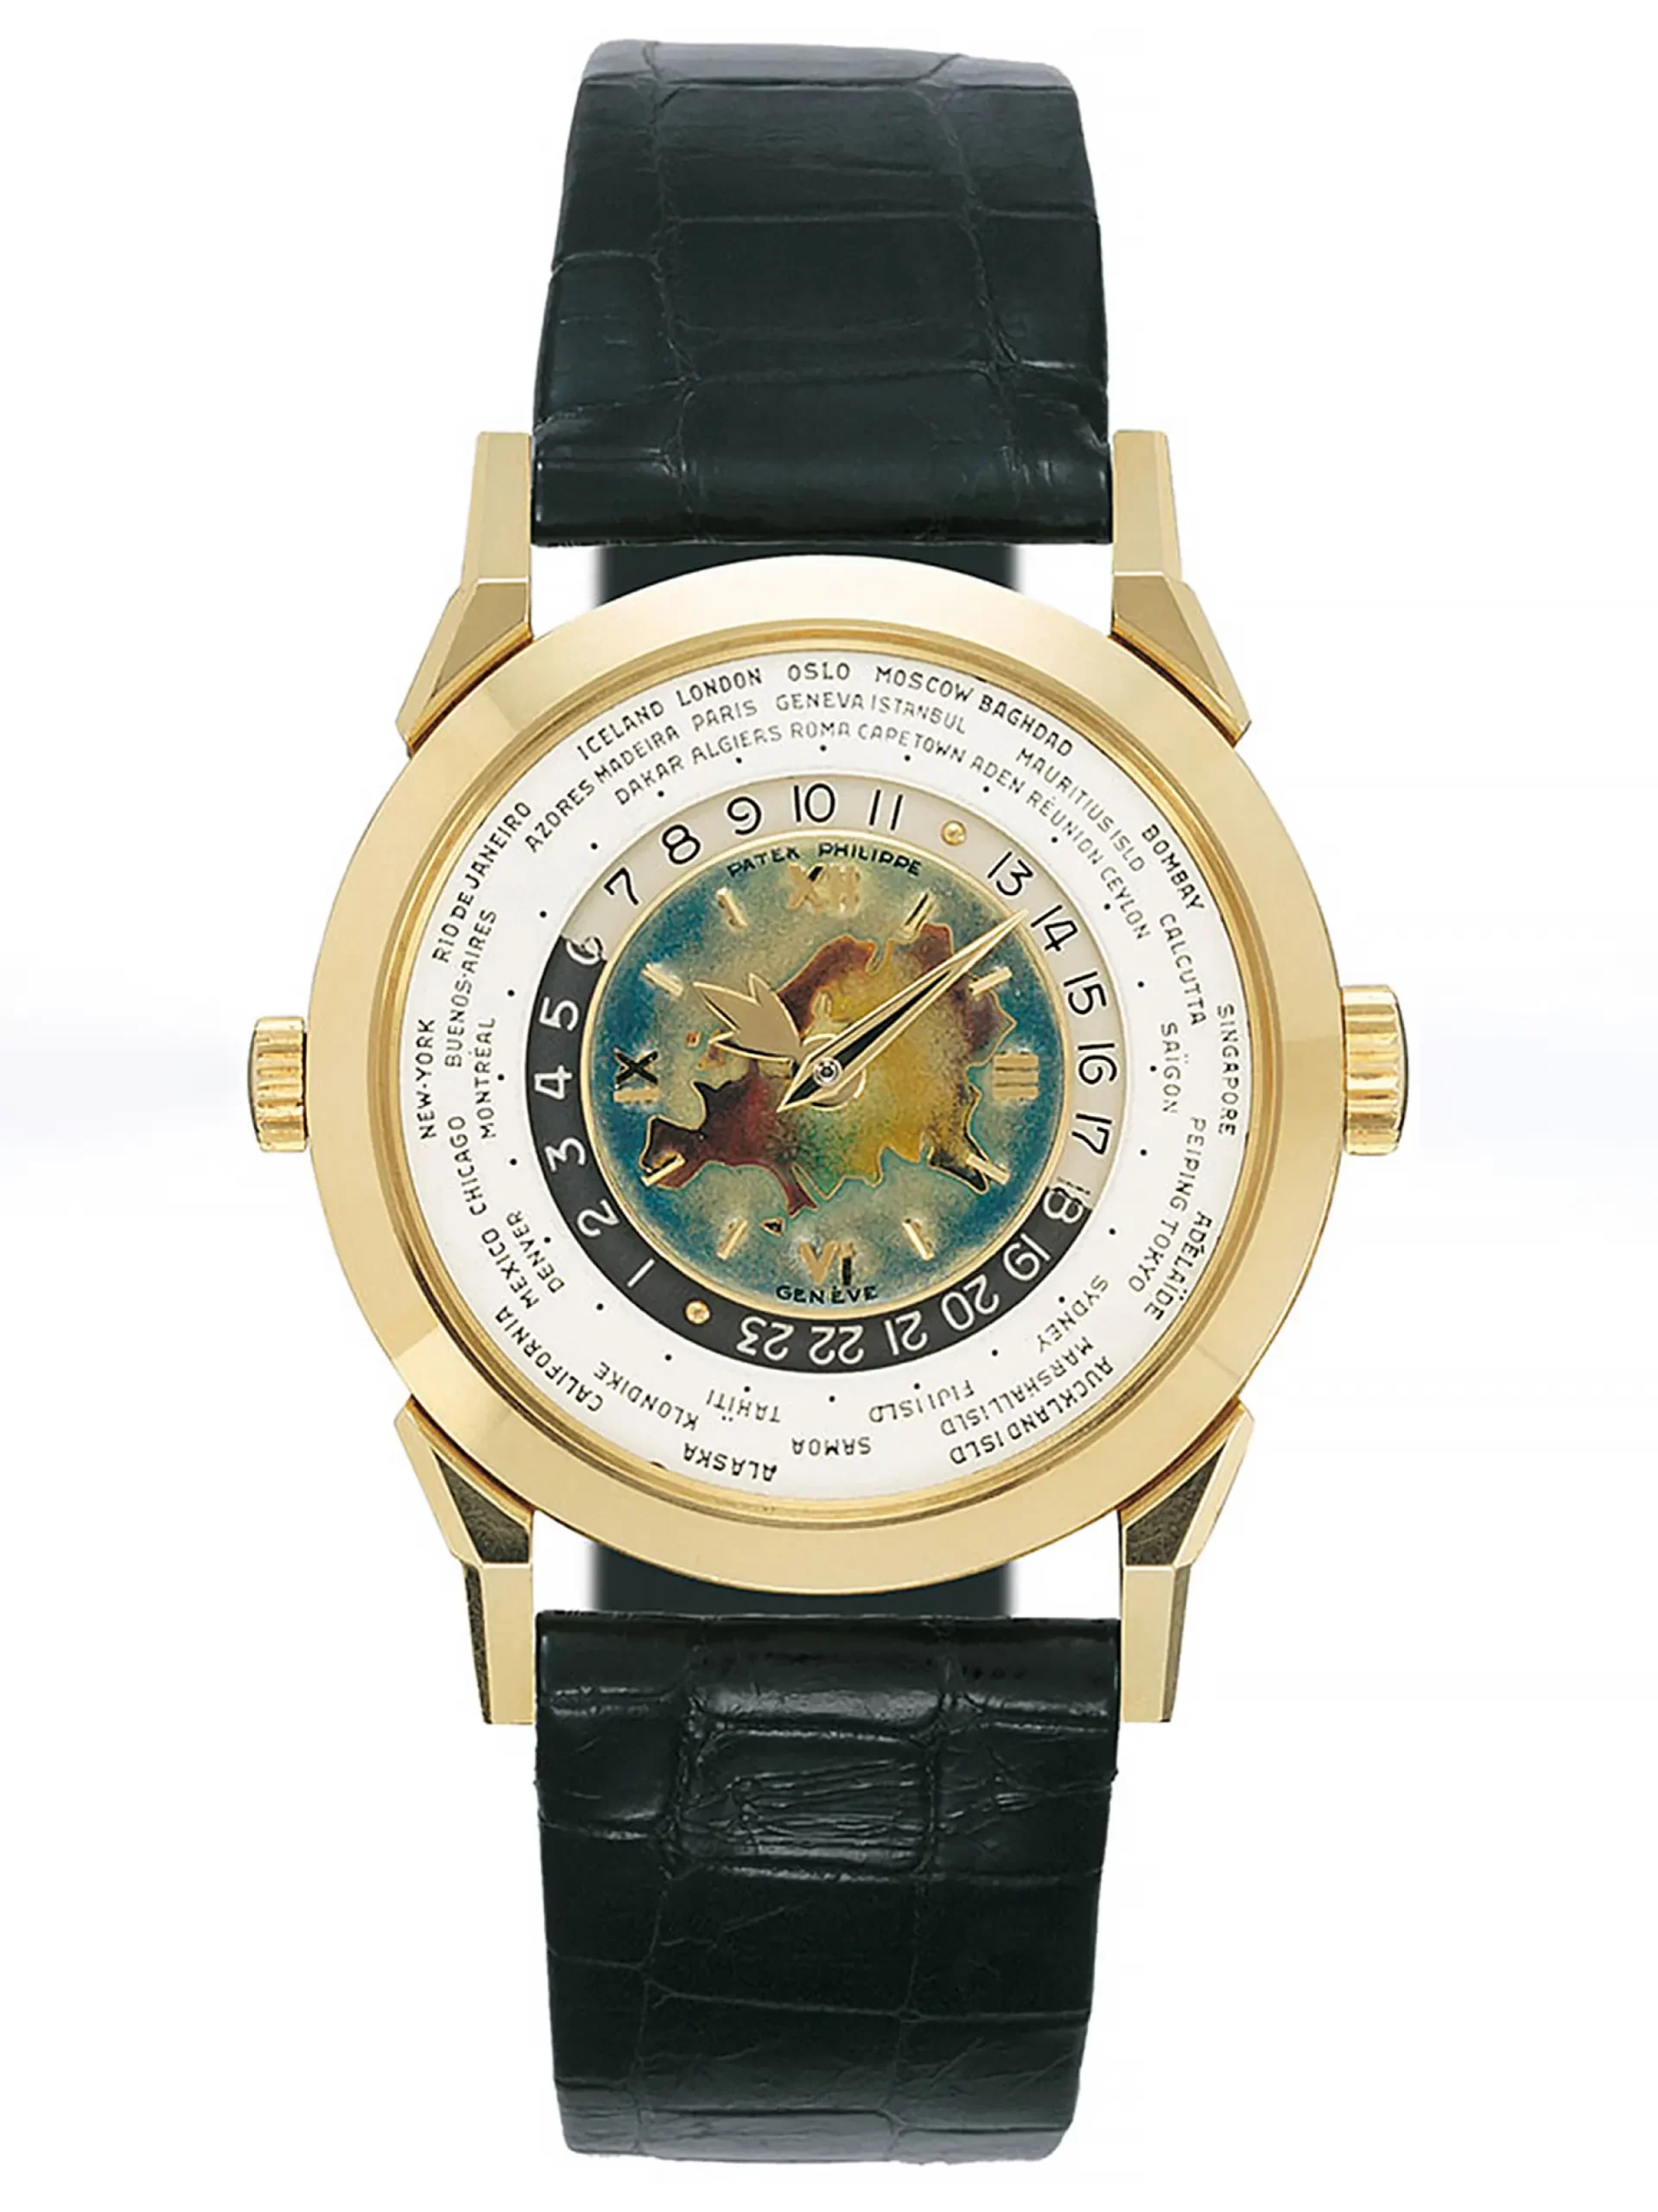 Re Patek Philippe World Time Scaled